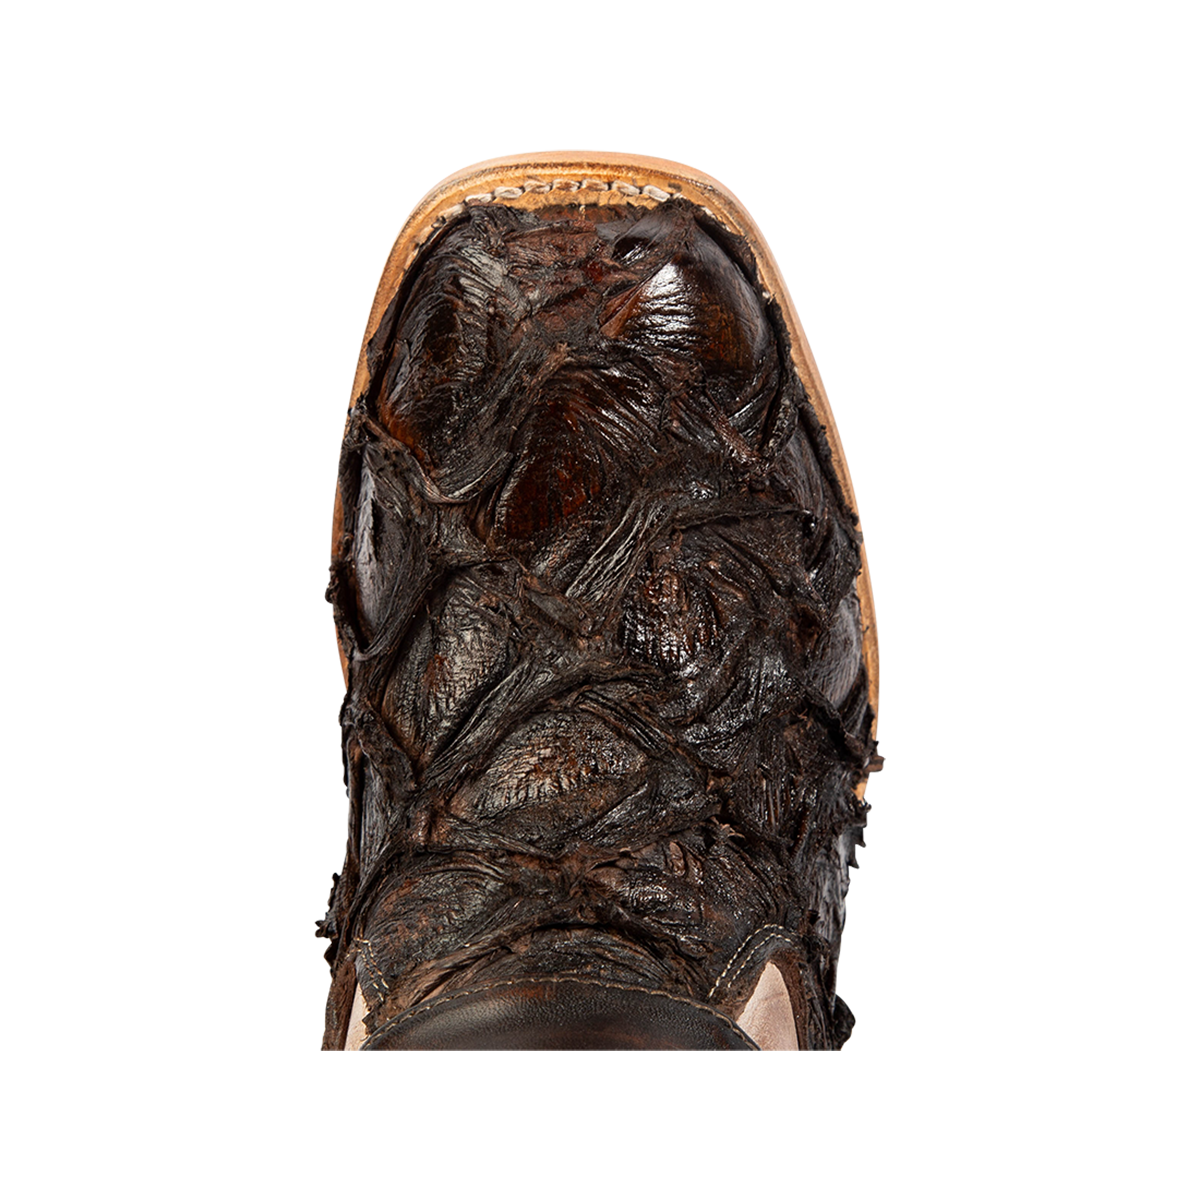 Top view showing exotic leather with square toe construction on FREEBIRD women's Darcy taupe multi fish leather boot 